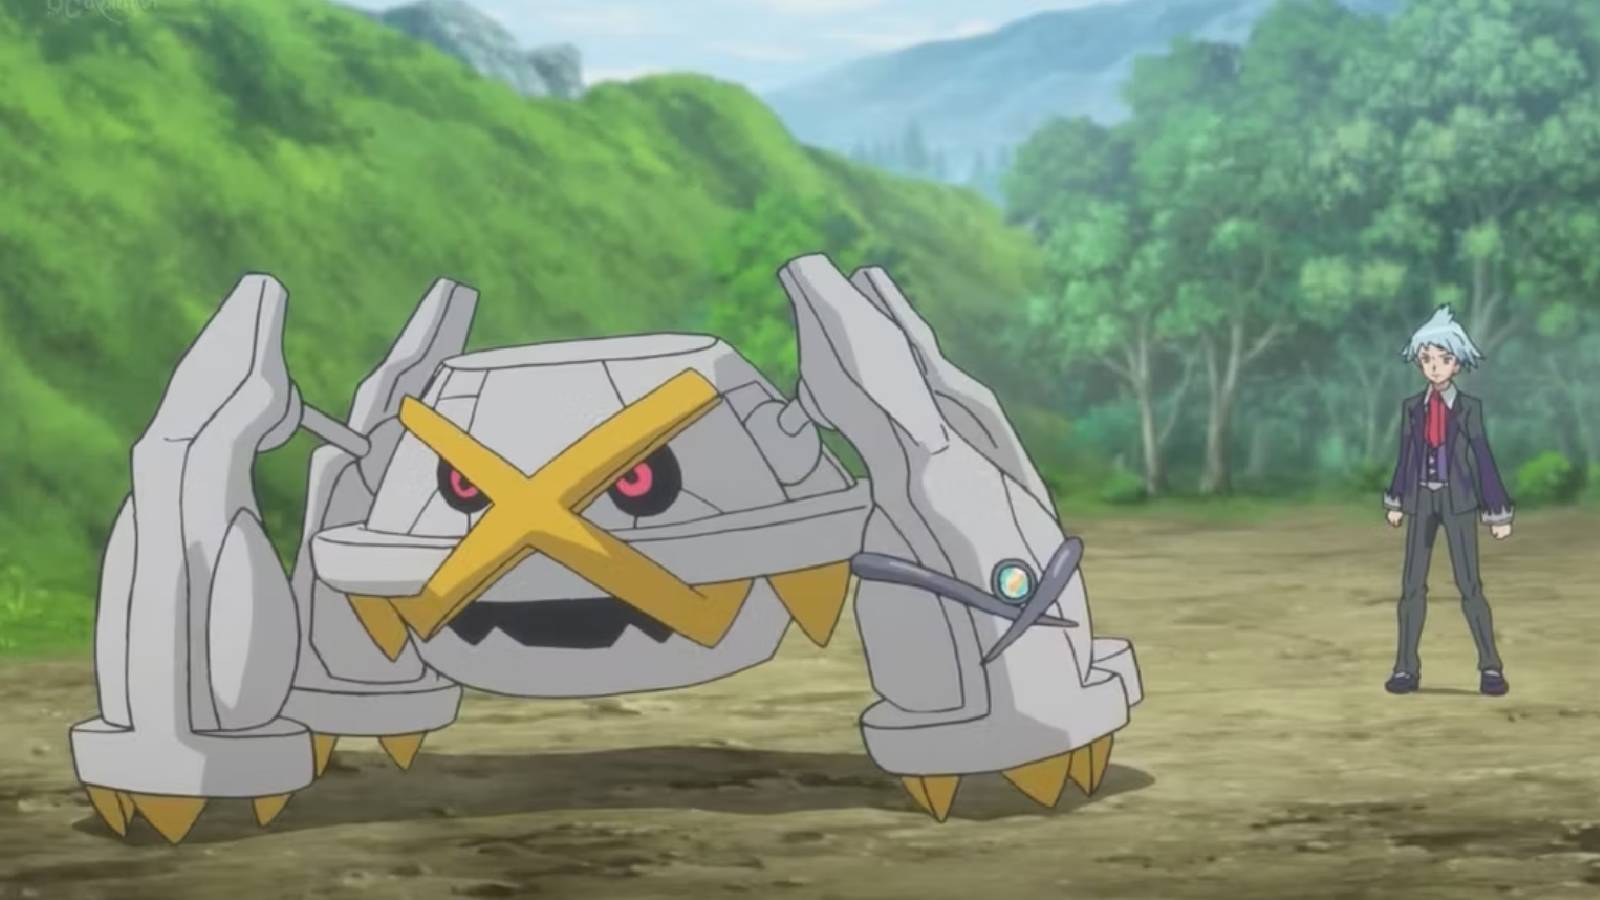 A screenshot from the Pokemon anime shows a Shiny Metagross and their trainer Stephen